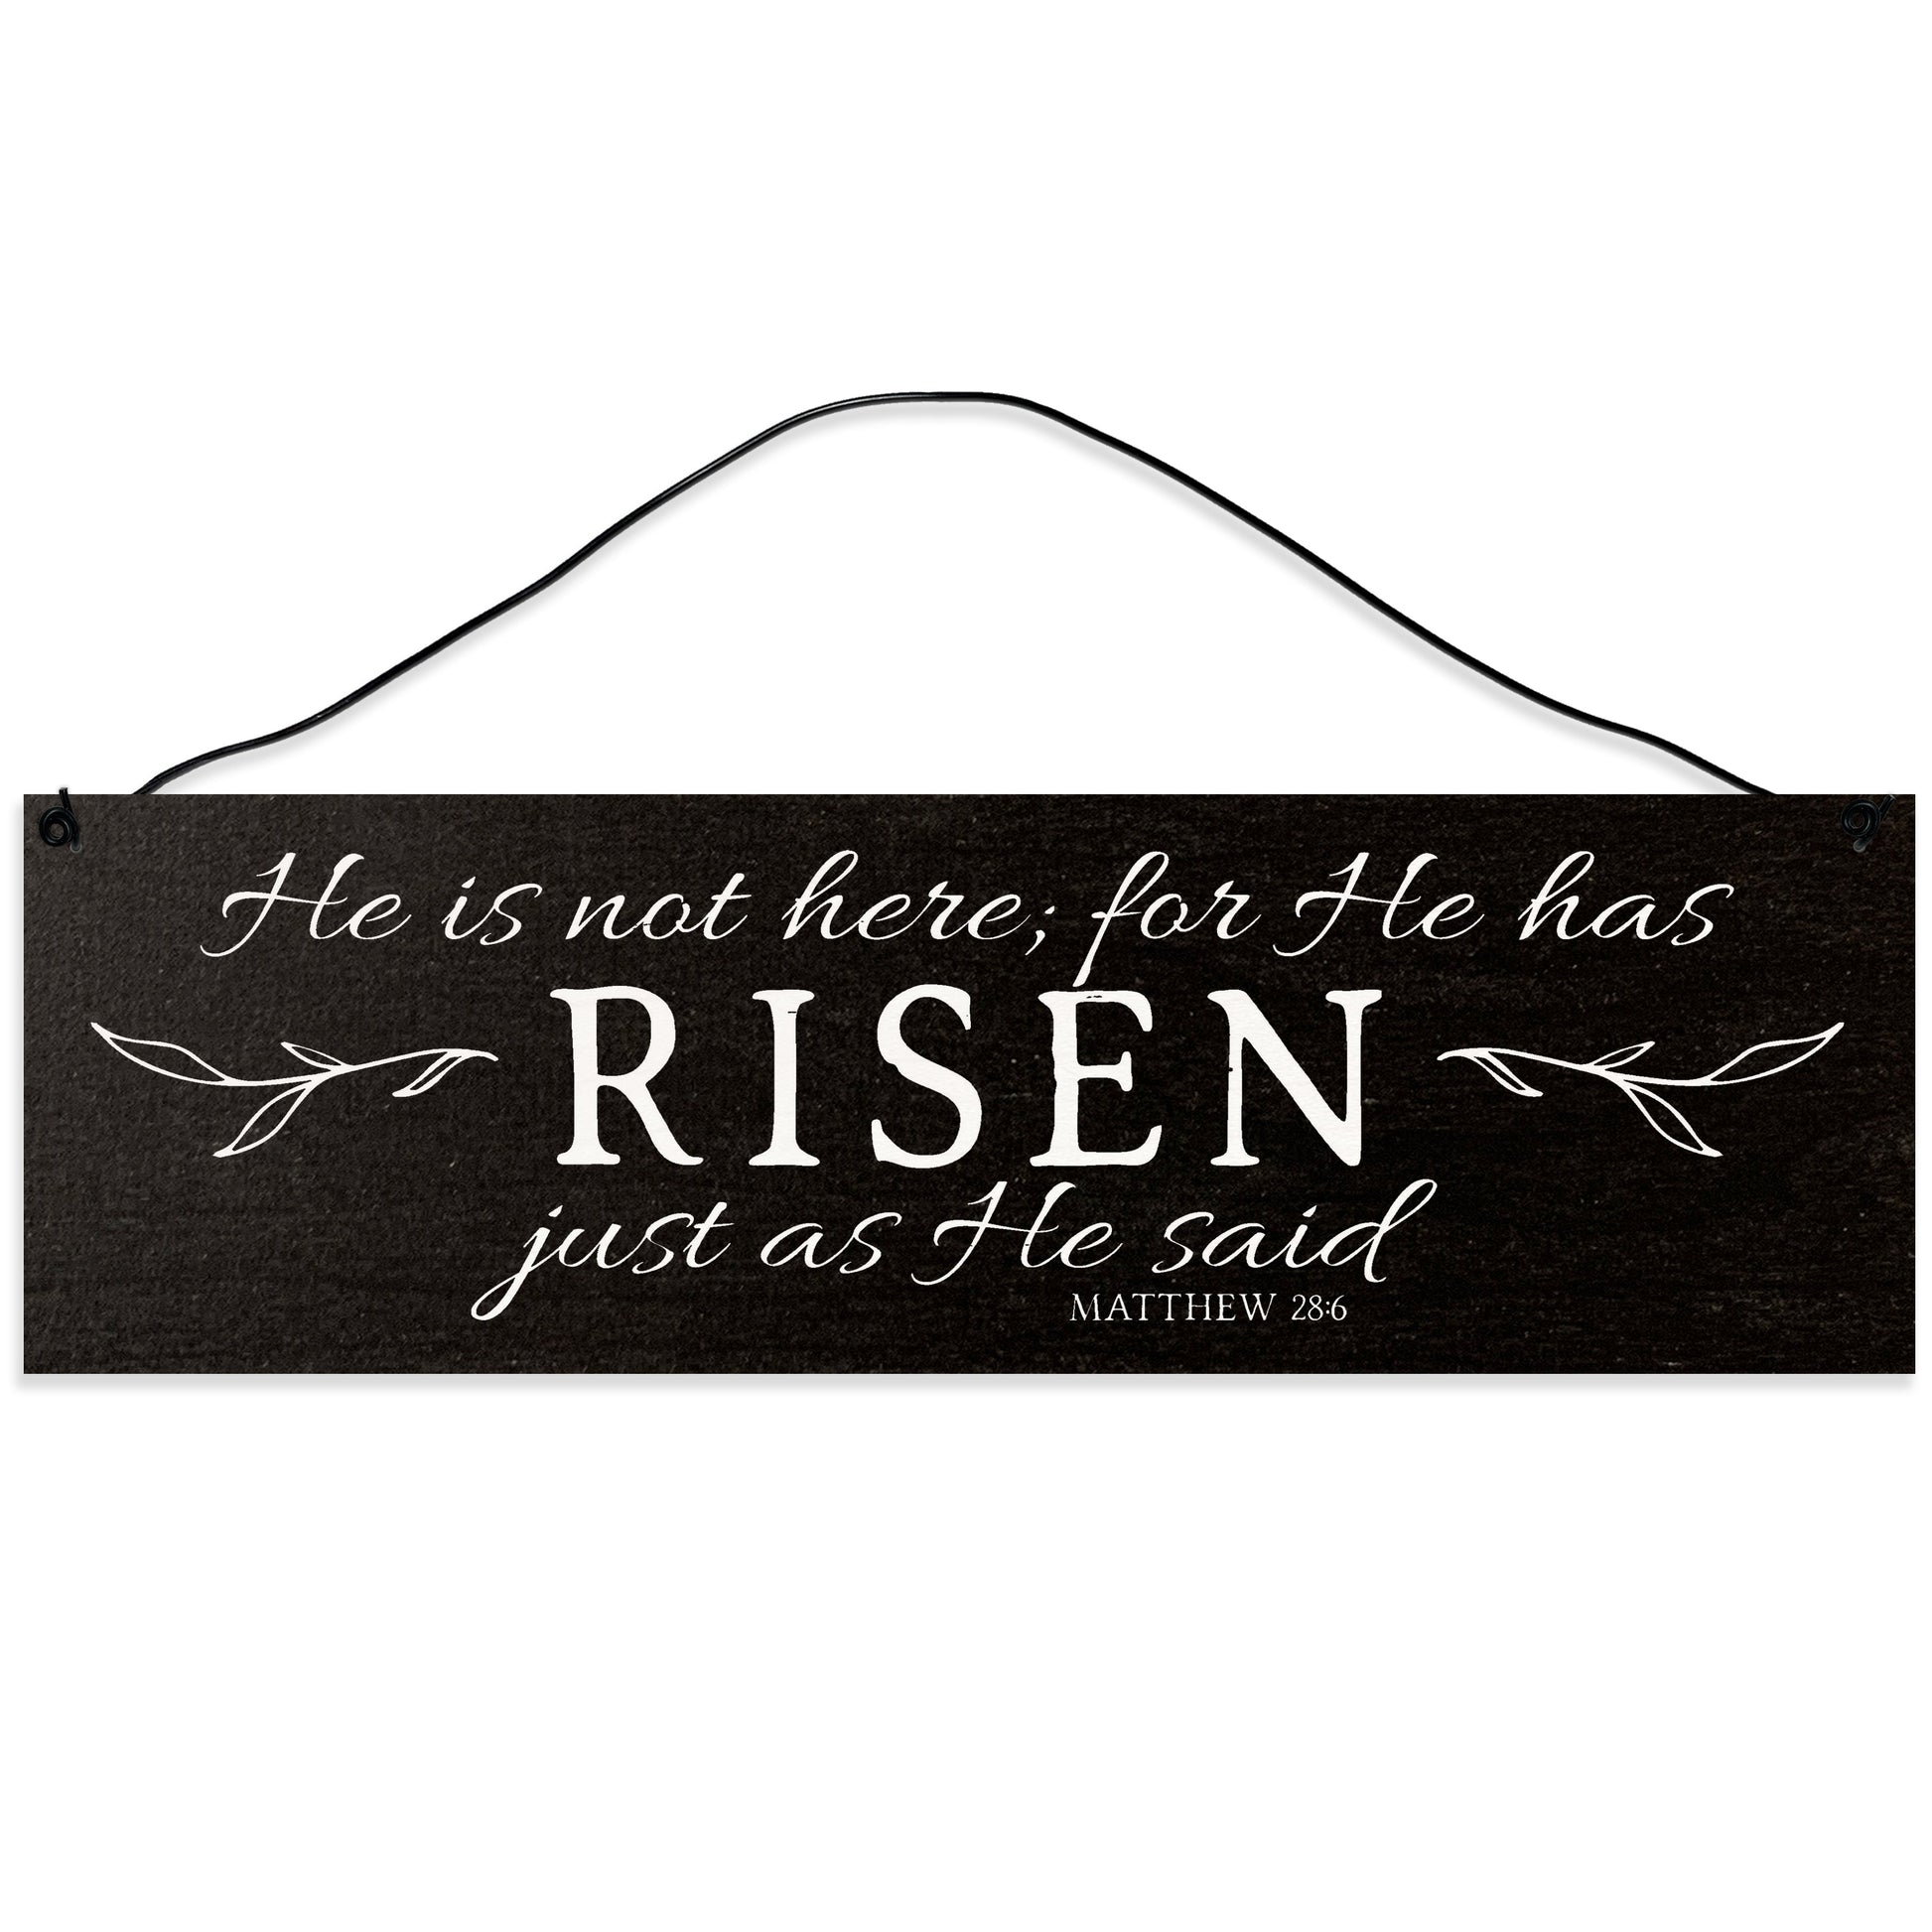 Sawyer's Mill - He is not Here; for He Has Risen Just as He Said. Matthew 28:6 Wood Sign for Home or Office. Measures 3x10 inches.